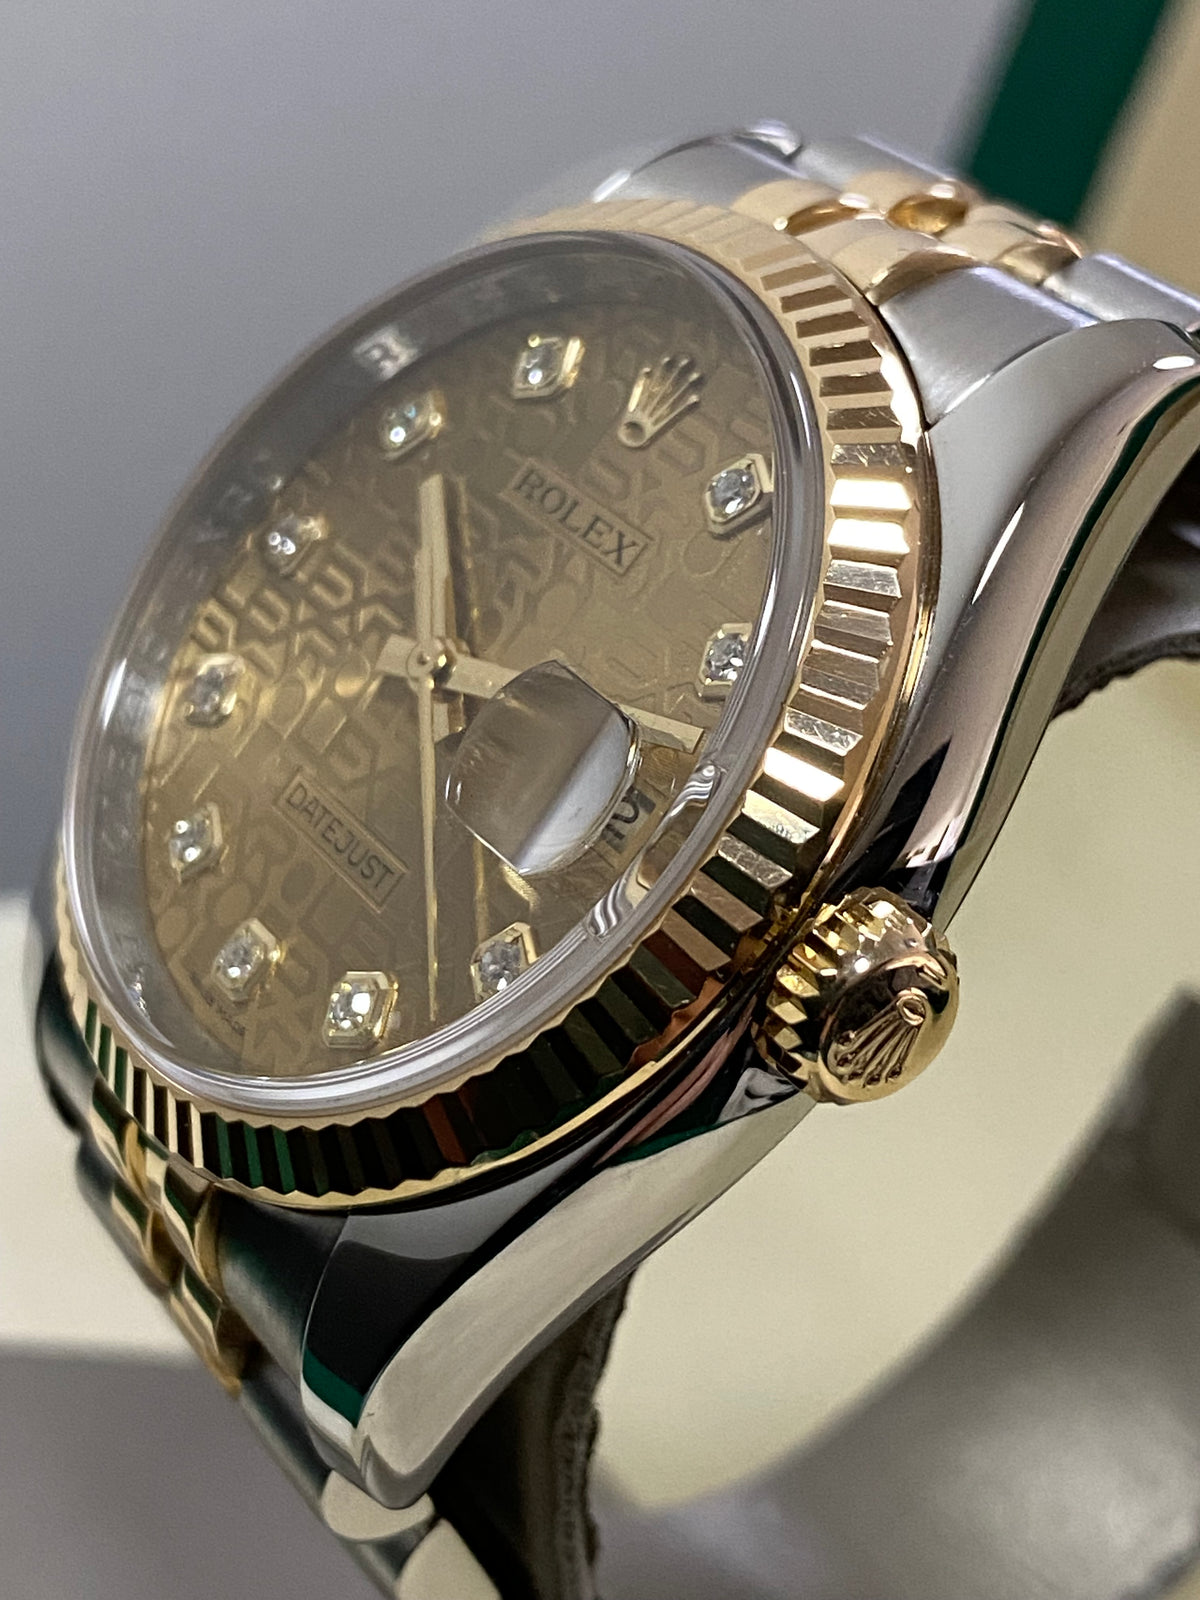 Rolex Steel and Yellow Gold Datejust 36 - V Serial - Fluted Bezel - Factory Diamond Dial - Jubilee Bracelet - 116233